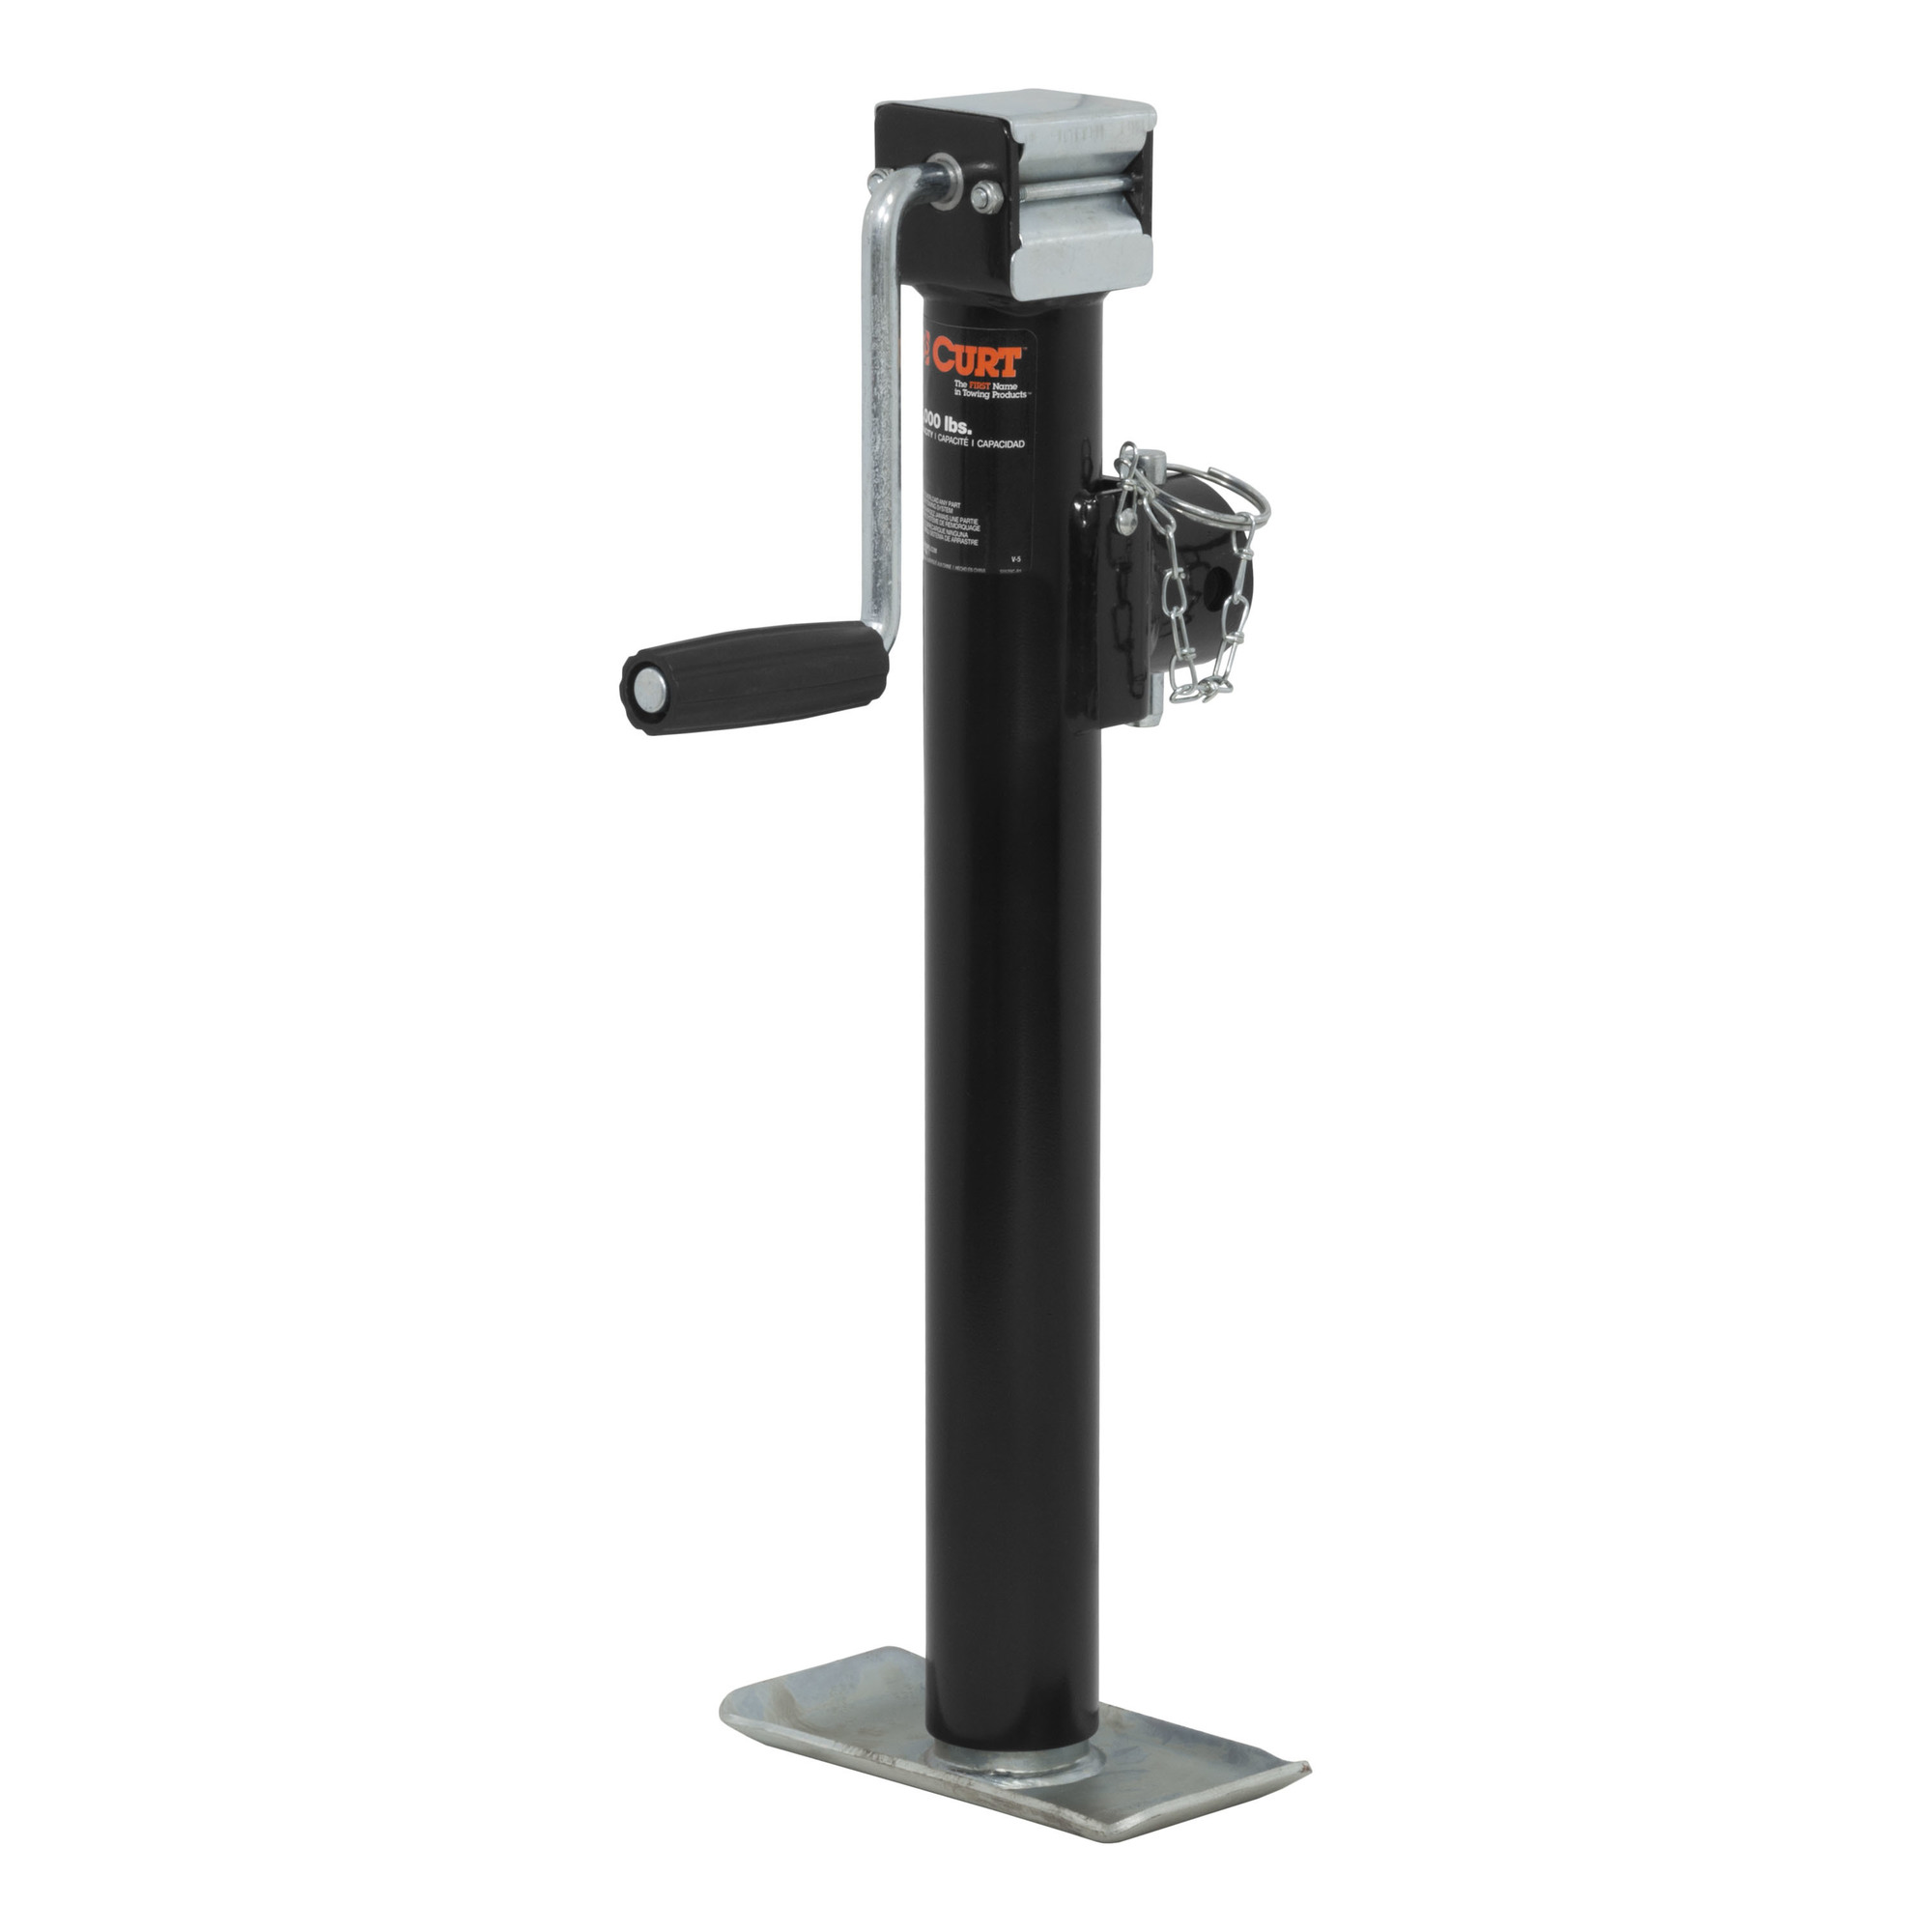 Curt Manufacturing, Pipe-Mnt Jack w Side Handle 2000 lbs 15Inch Travel, Lift Capacity 2000 lb, Jack Type Sidewind, Mount Type Weld-On, Model 28324